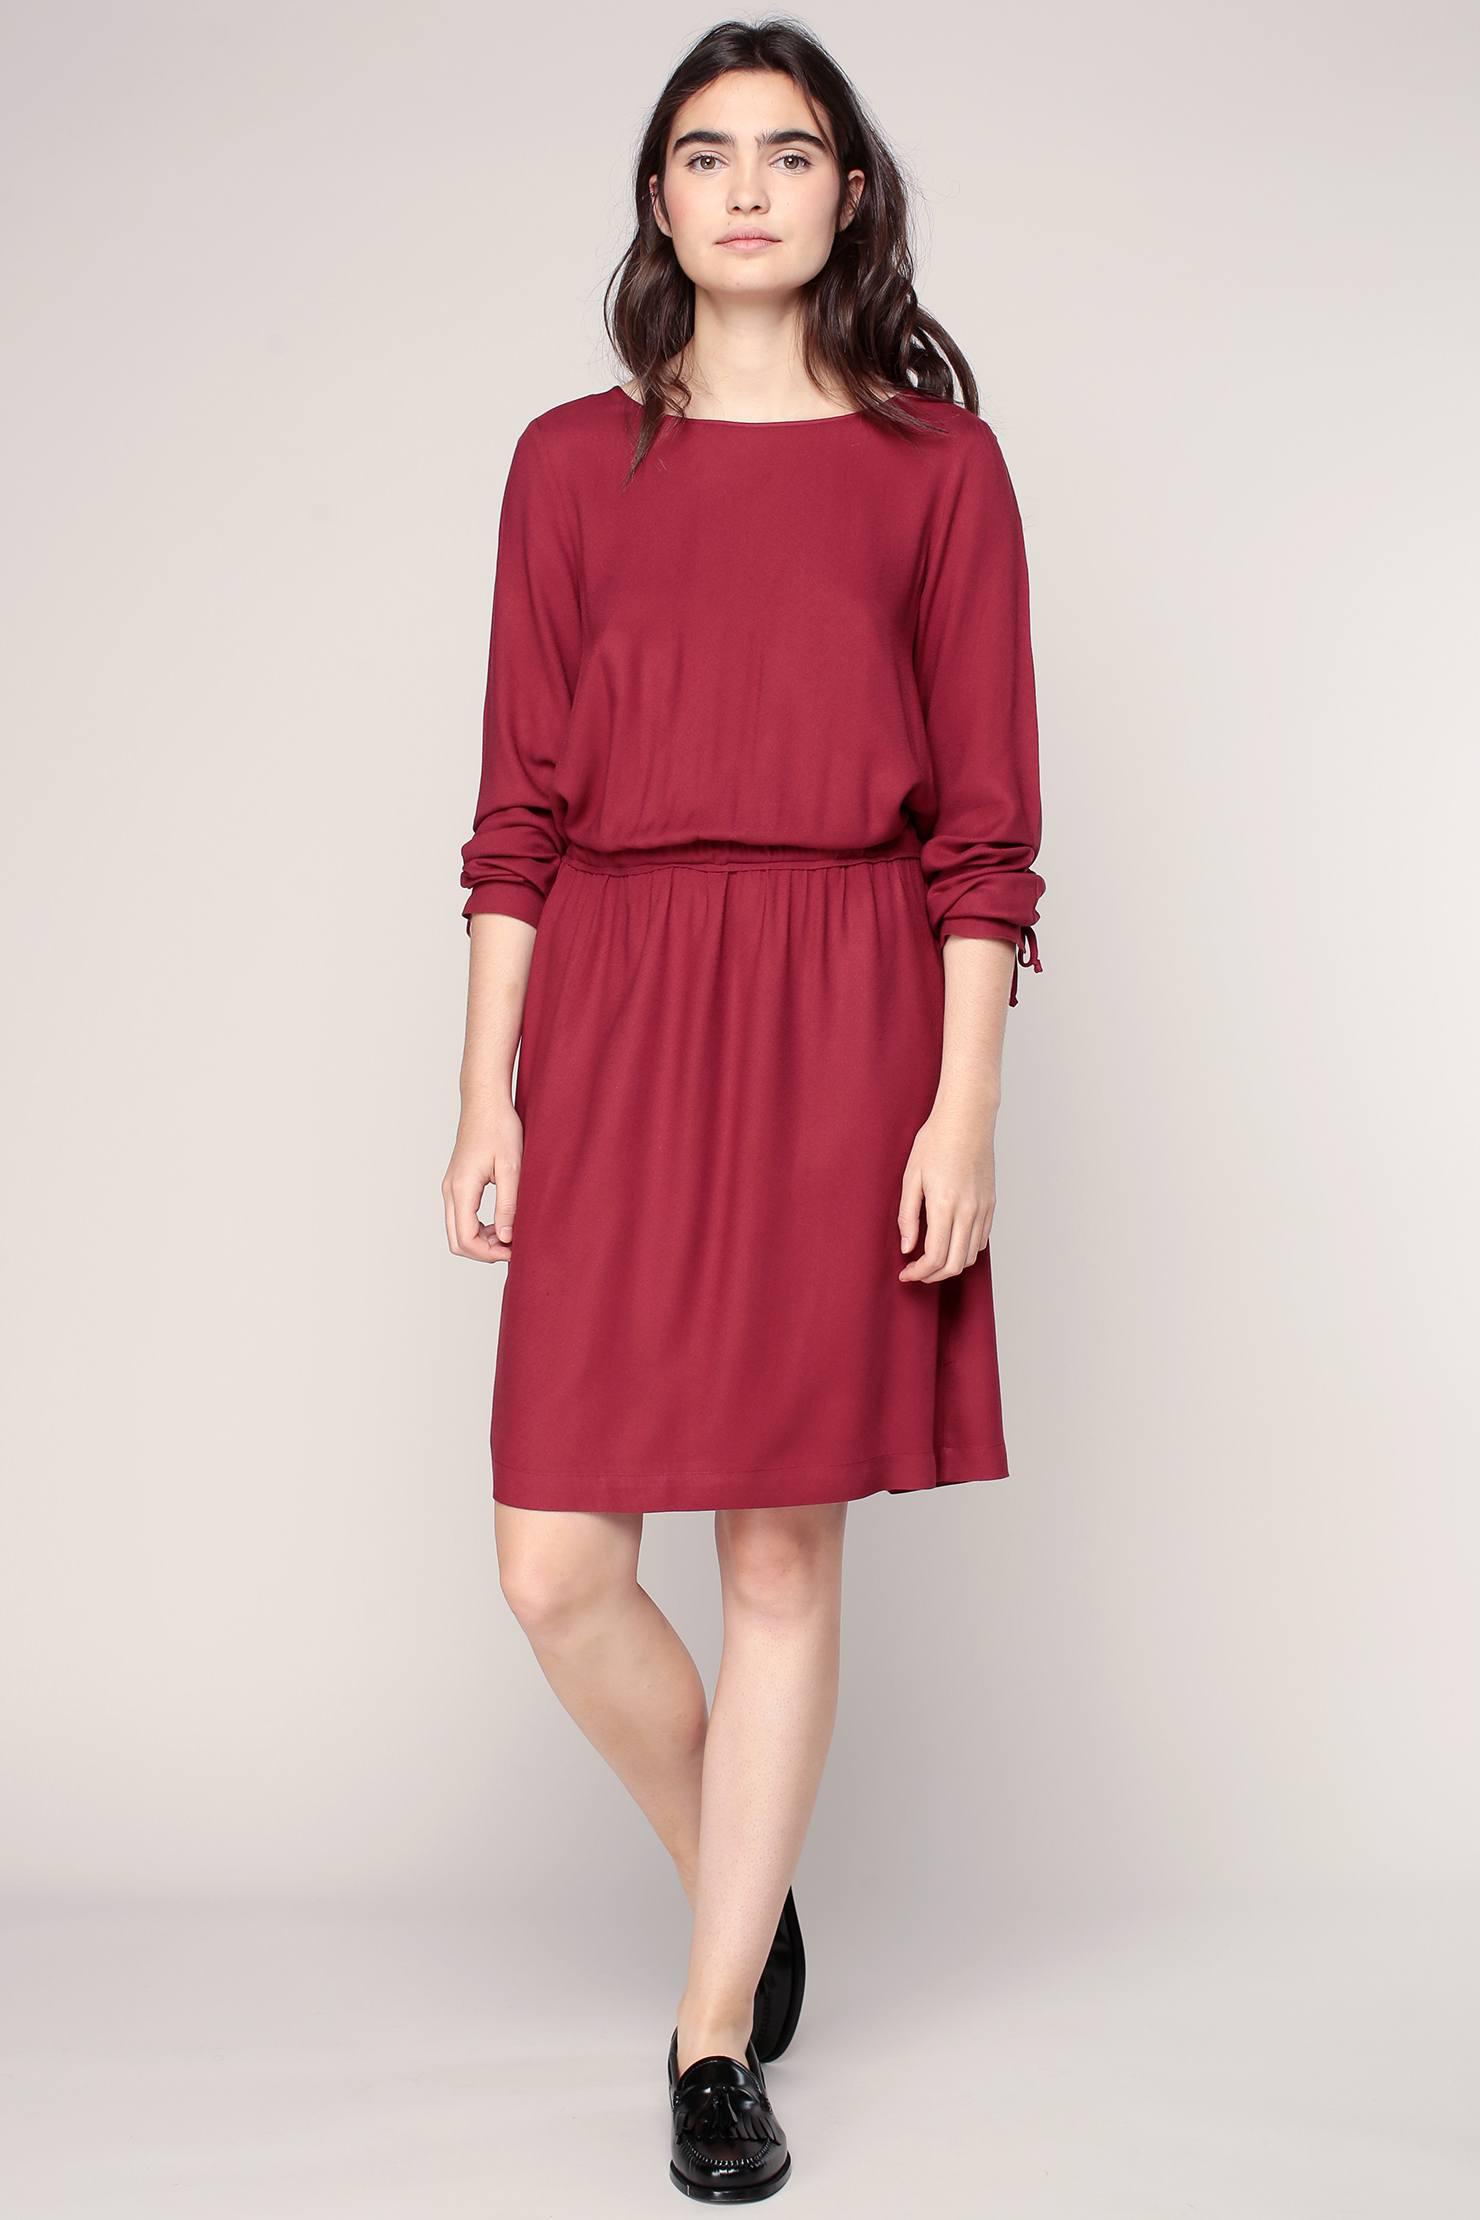 Lyst - Esprit Mid-length Dresse in Red